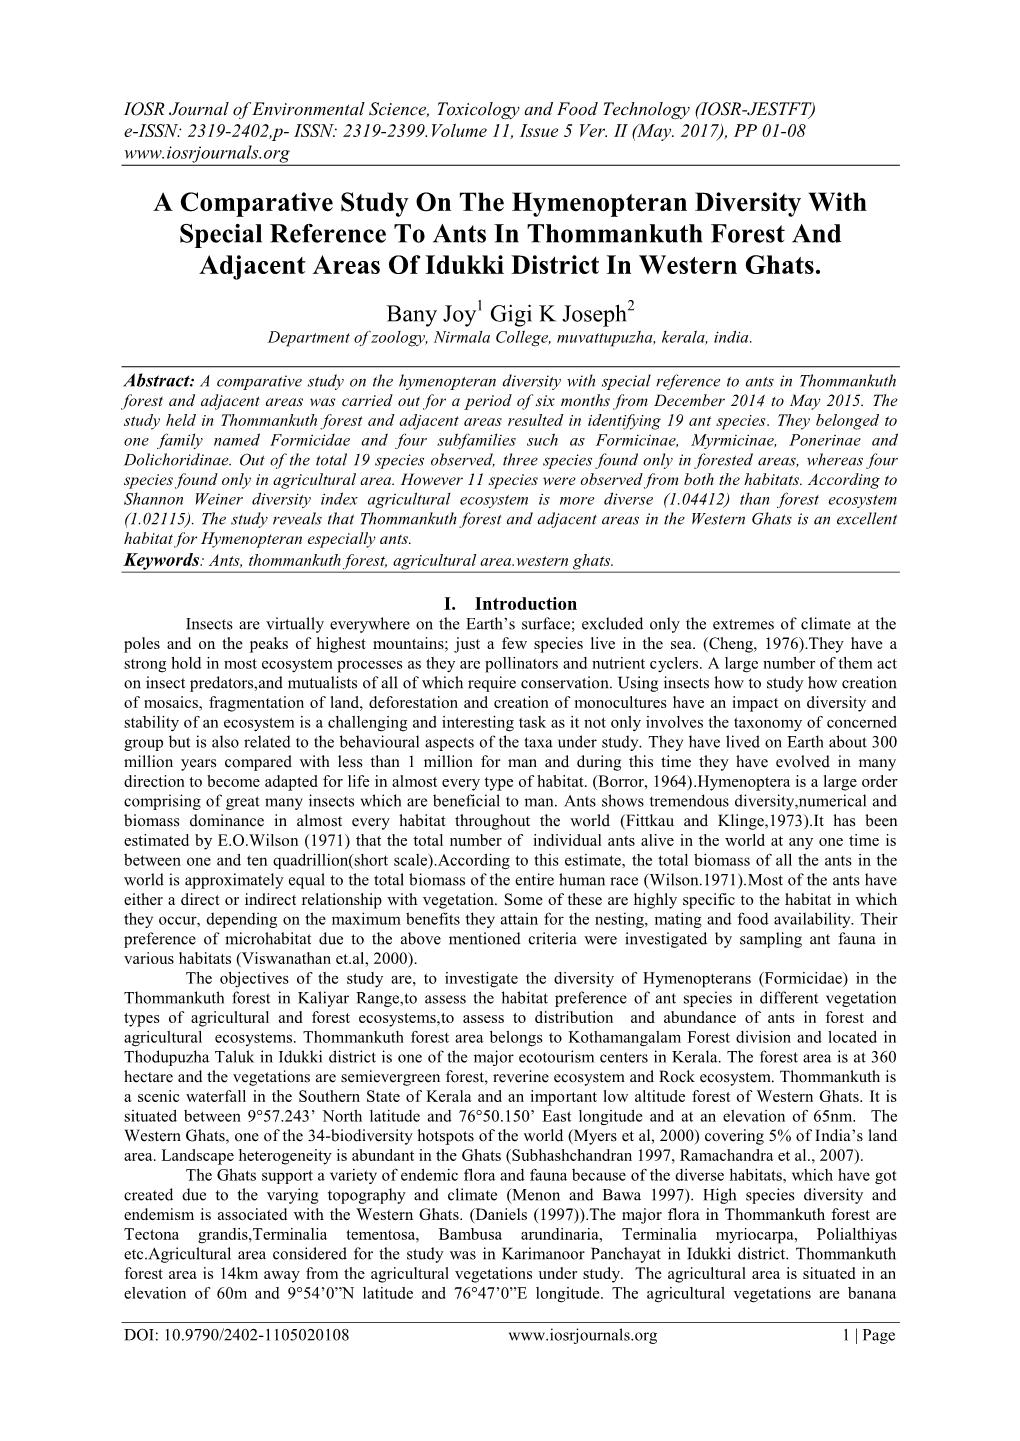 A Comparative Study on the Hymenopteran Diversity with Special Reference to Ants in Thommankuth Forest and Adjacent Areas of Idukki District in Western Ghats